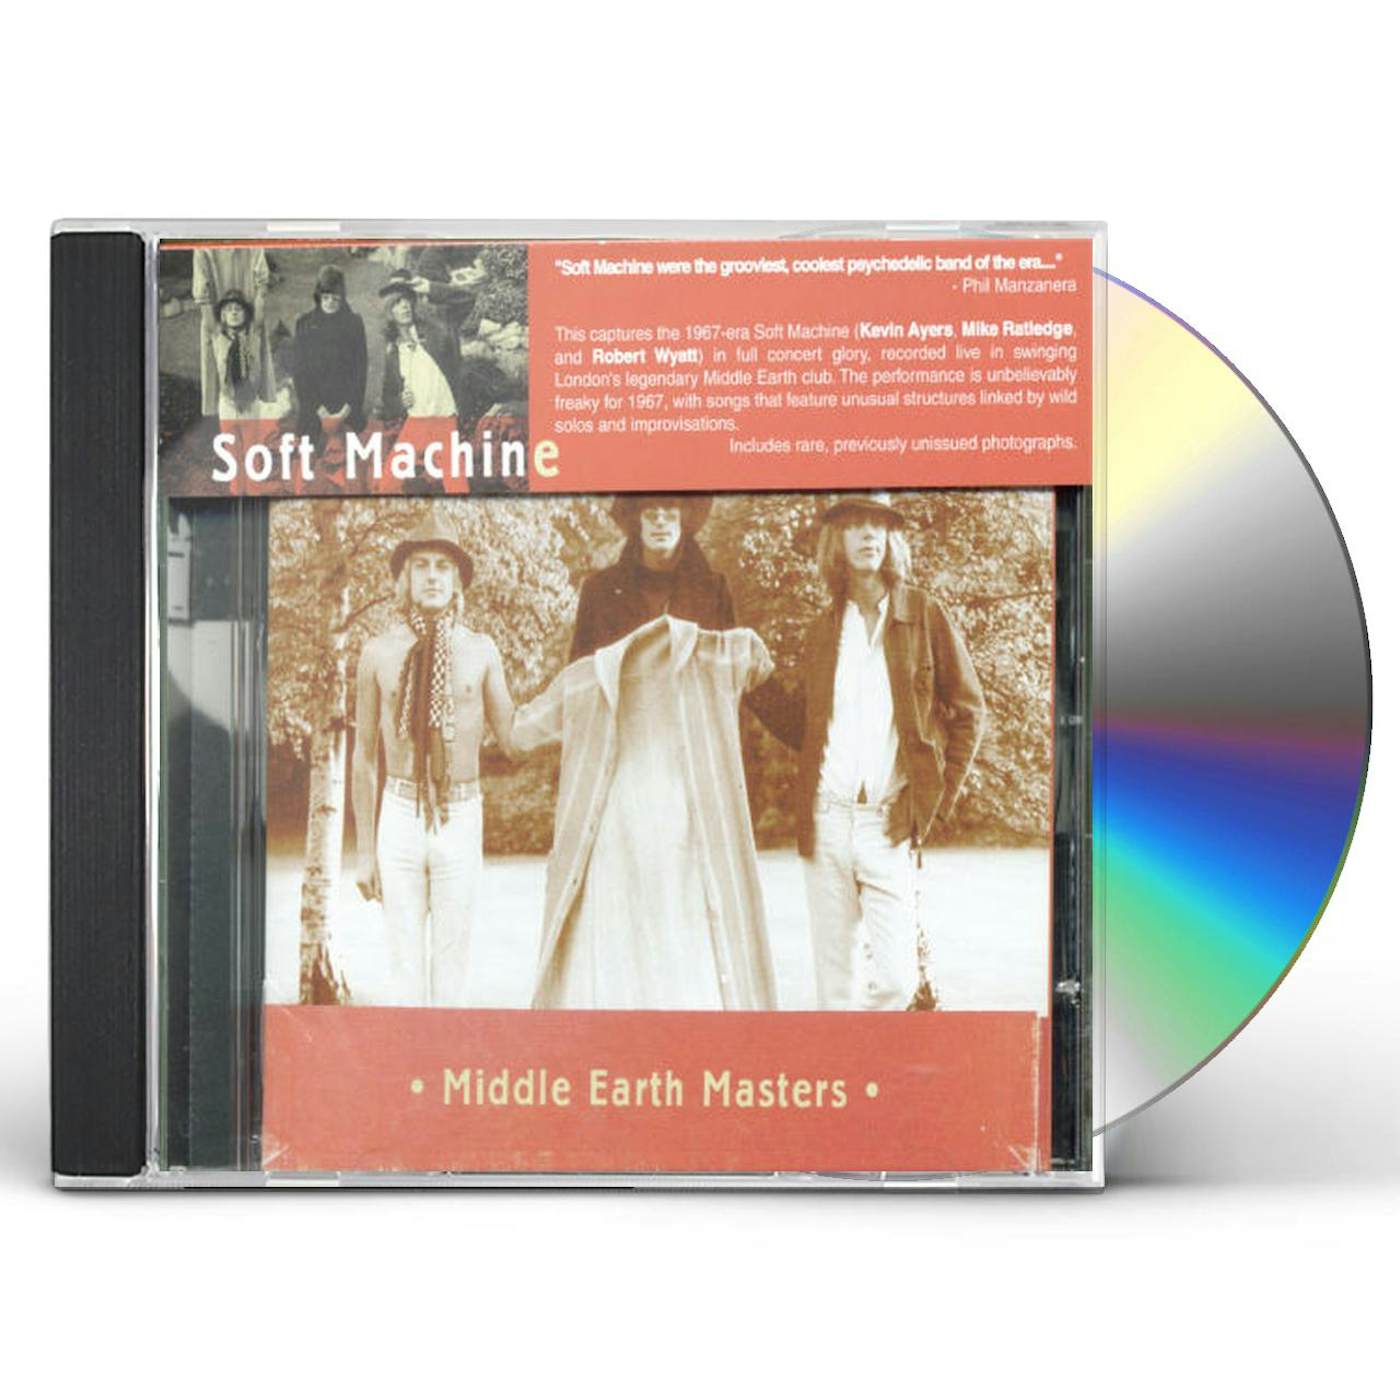 Soft Machine MIDDLE EARTH MASTERS CD